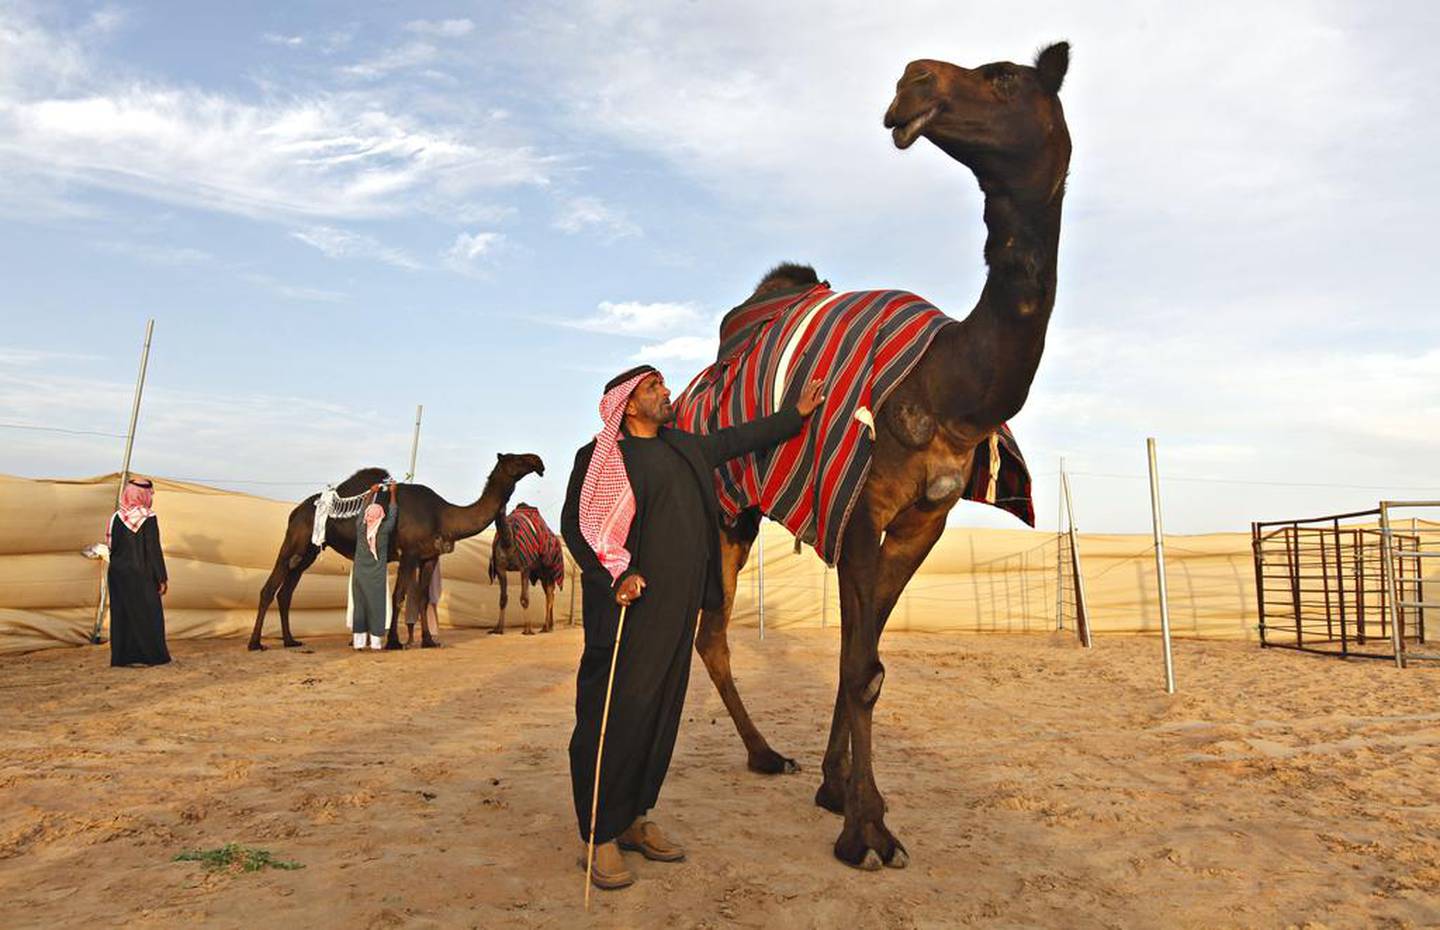 Rames Saleh al Menhali, who owns 70 black camels, stands with his prize camel, Wahaidah, ‘The One’ in his camel corral at the Al Dhafra Festival at Madinat Zayed, Al Gharbia, Abu Dhabi. Jeff Topping / The National.